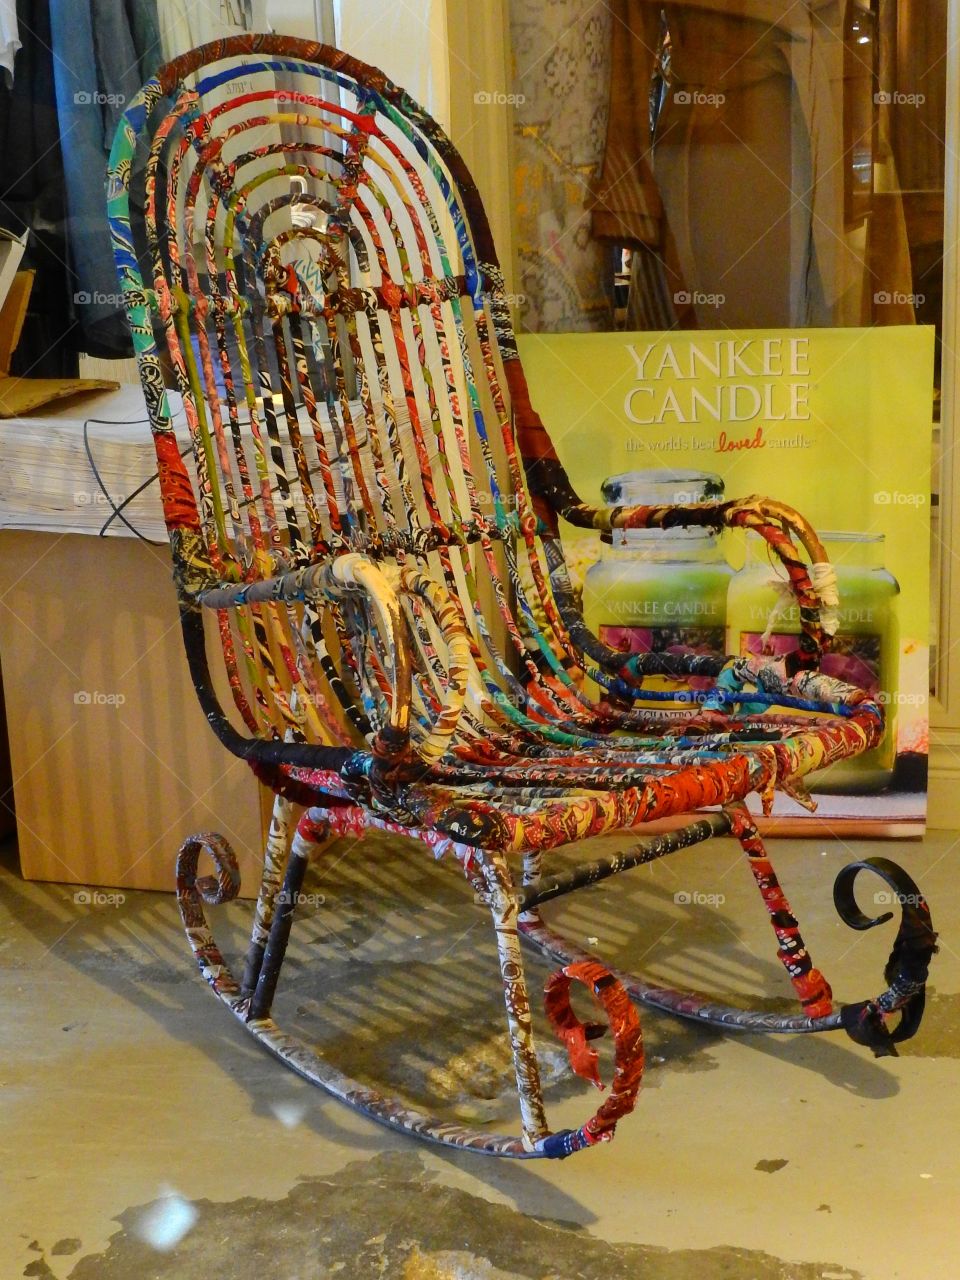 Colorful rocking chair